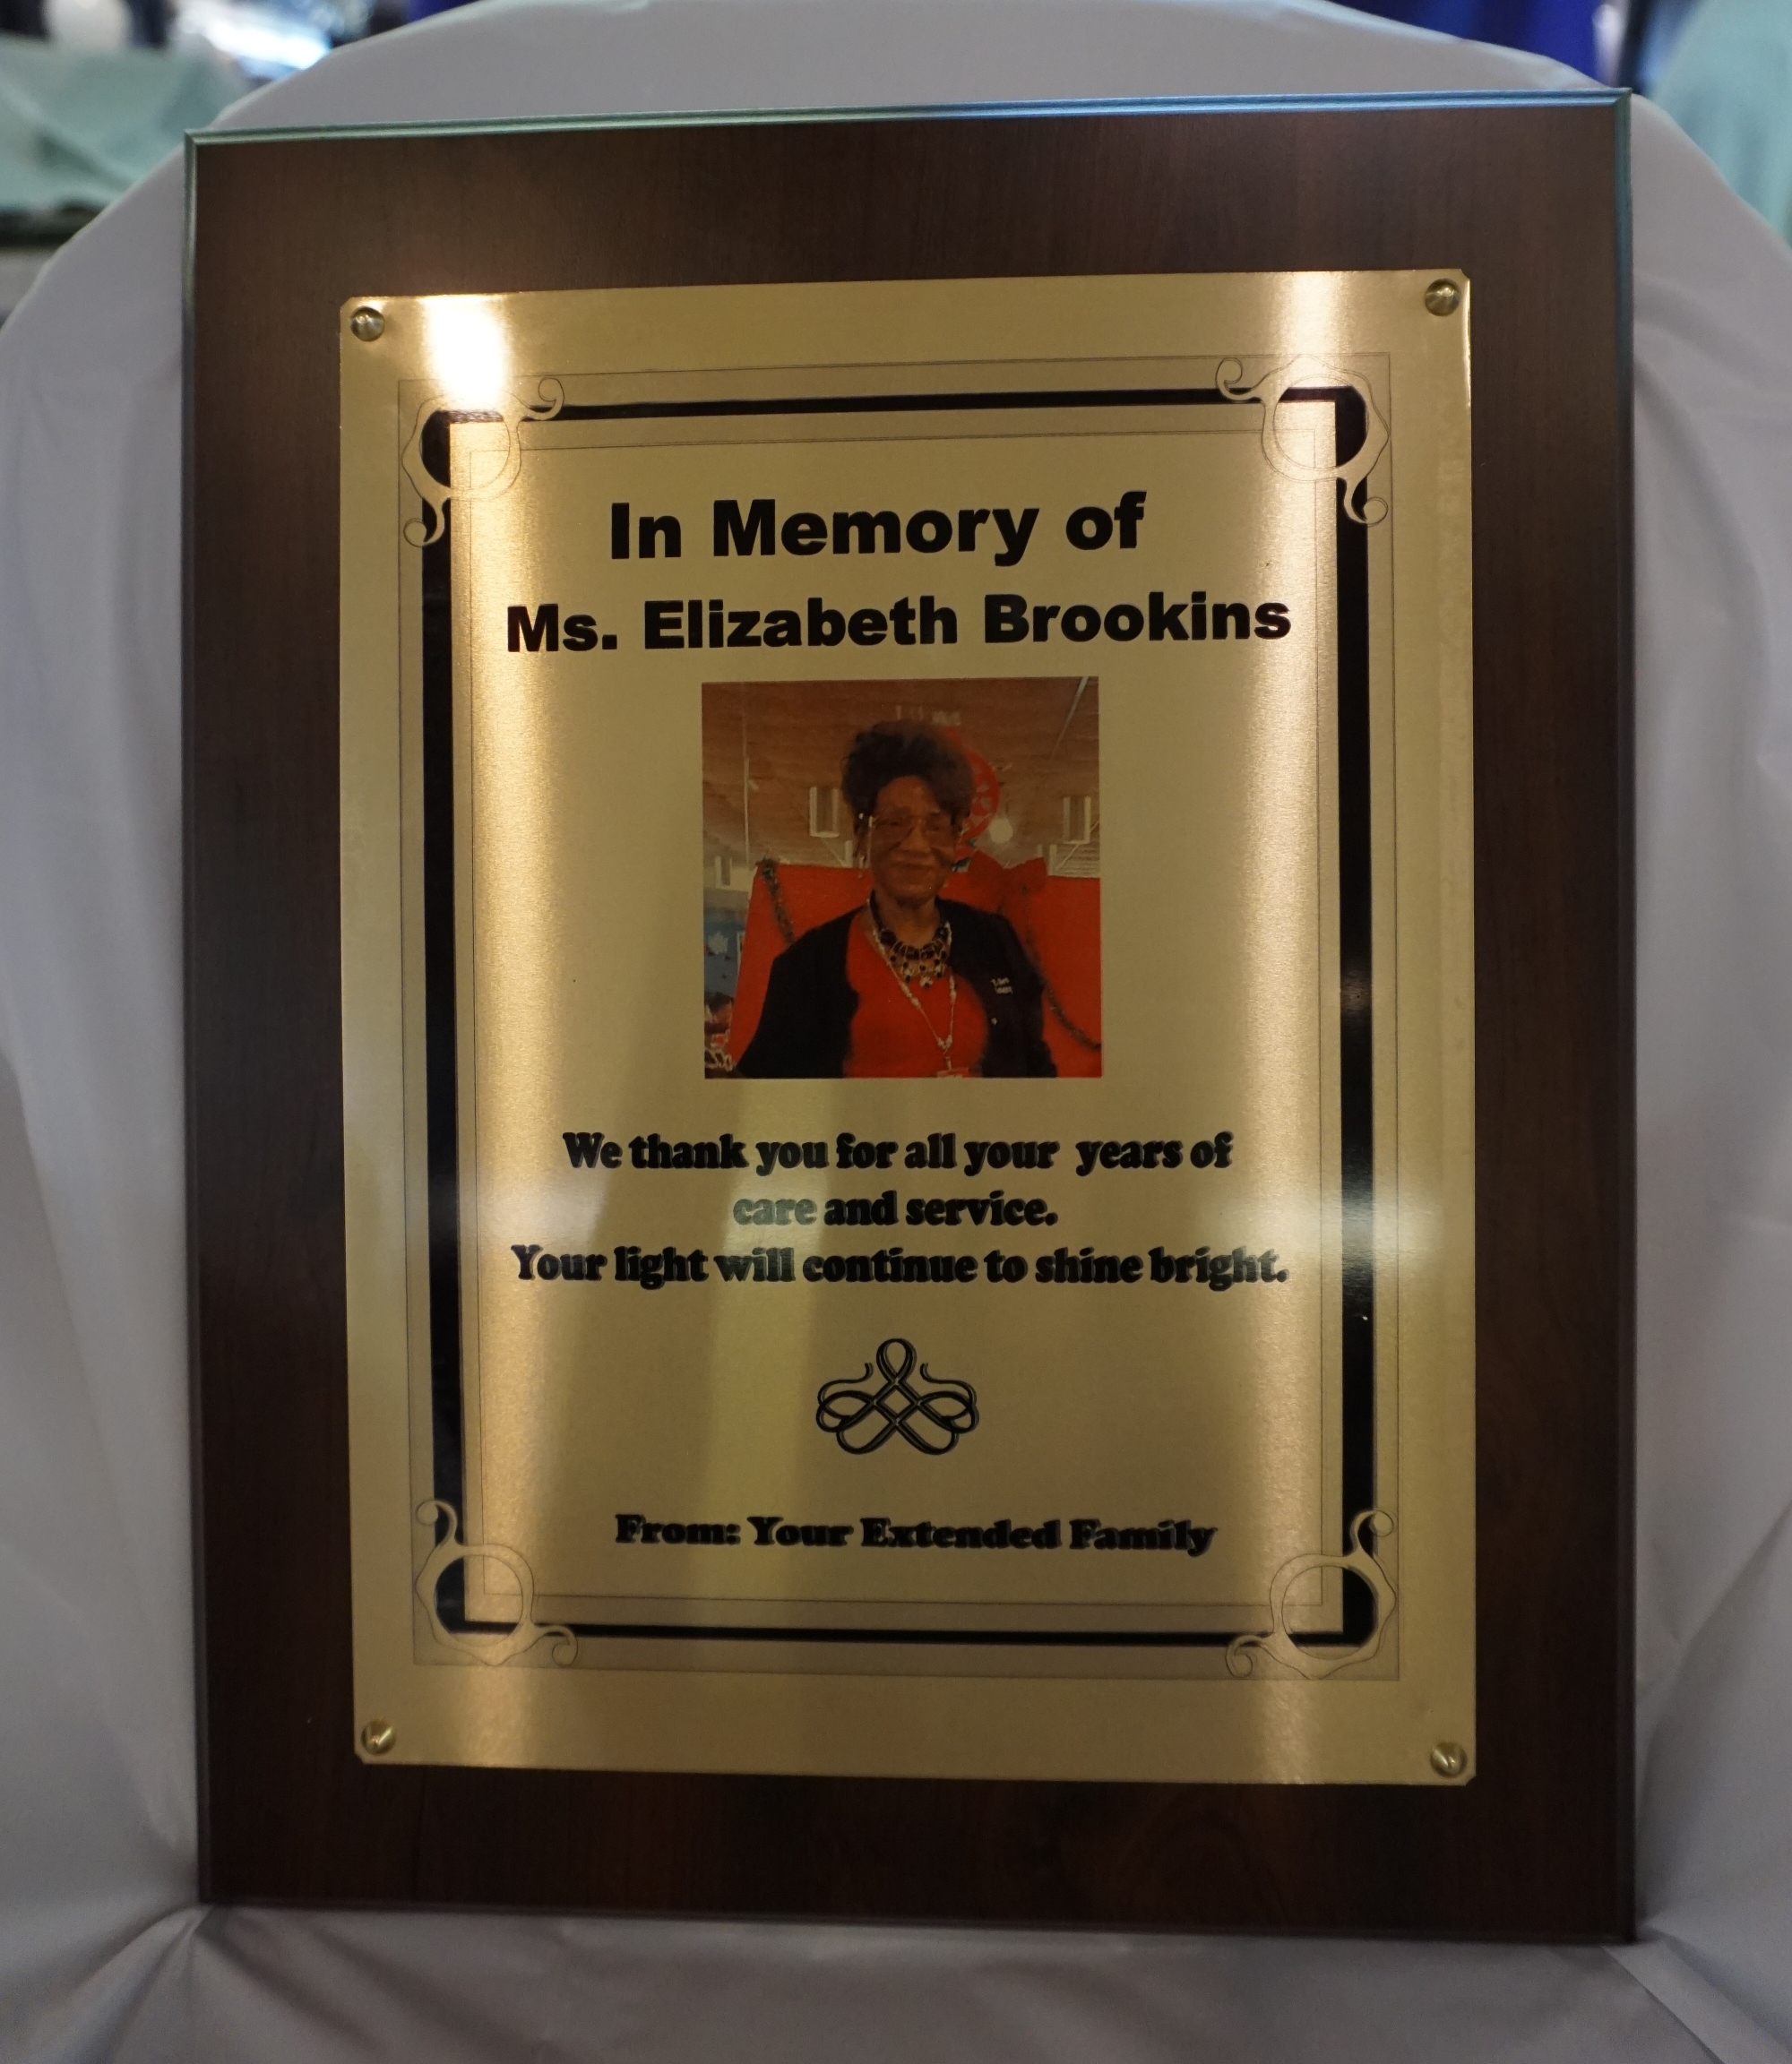 You are currently viewing Extended Care Celebrates The Life Of Elizabeth Brookins